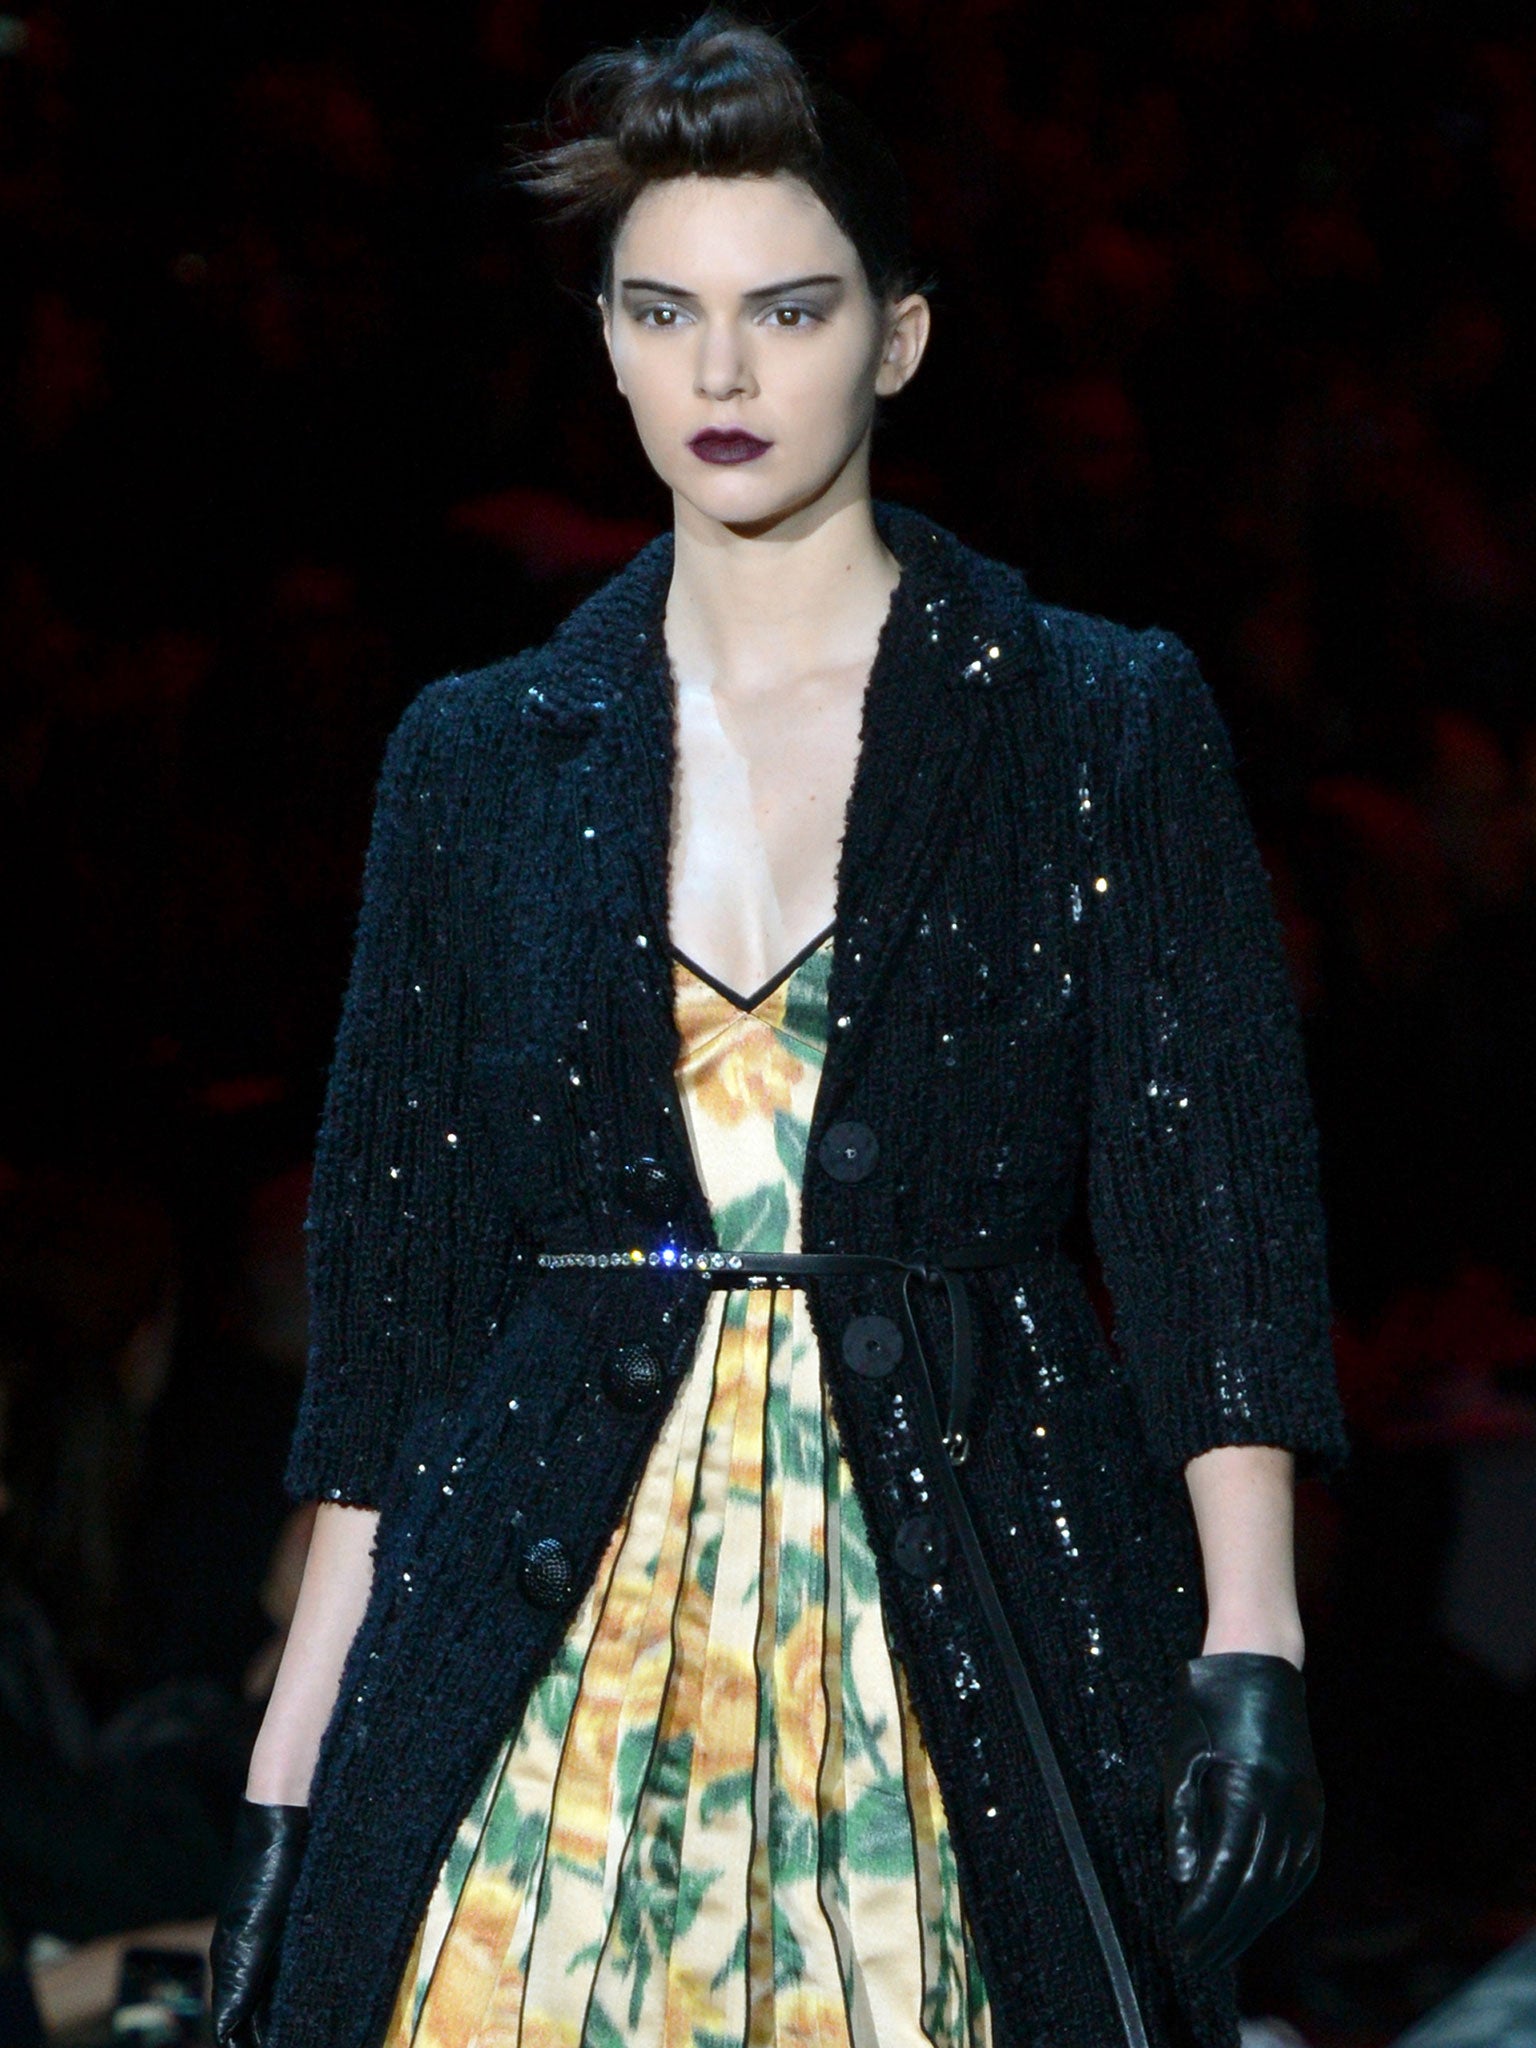 Photos from Kendall Jenner's Runway Transformation